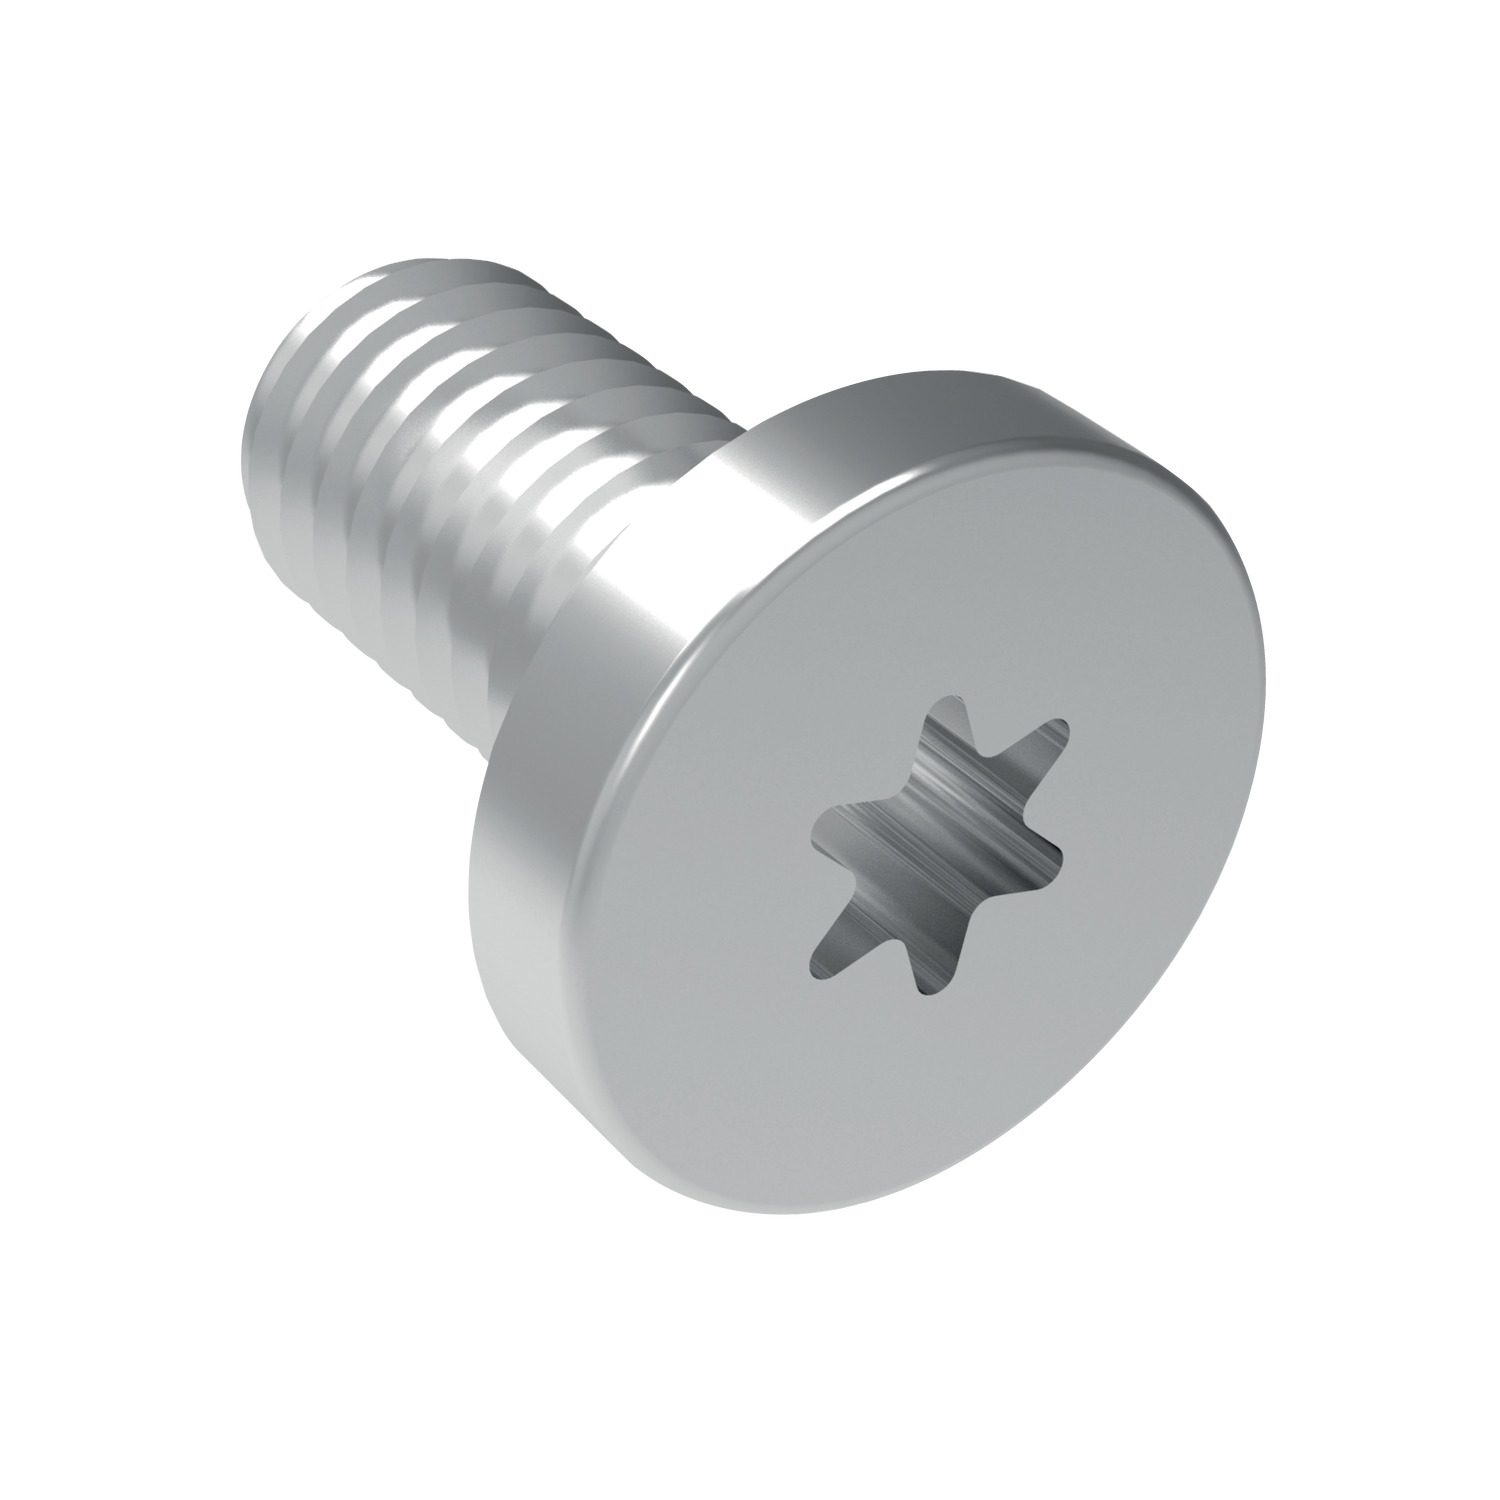 Product L1971.S, Fixing screws for stainless steel X rail / 